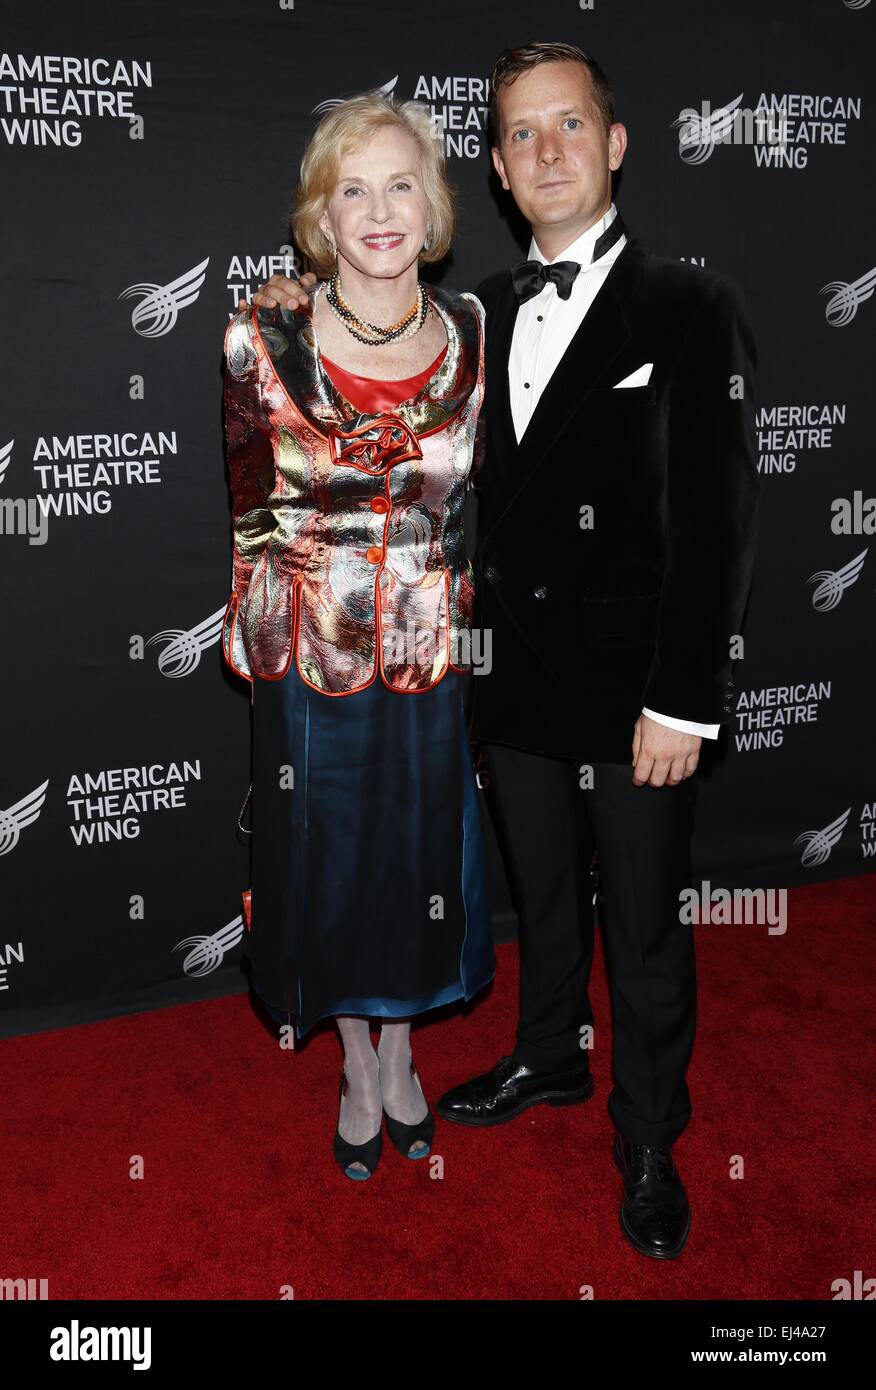 The 2014 American Theatre Wing Annual Gala held at the Plaza Hotel - Arrivals Featuring: Pia Lindstrom,Nick Daly Where: New York City, New York, United States When: 15 Sep 2014 Stock Photo